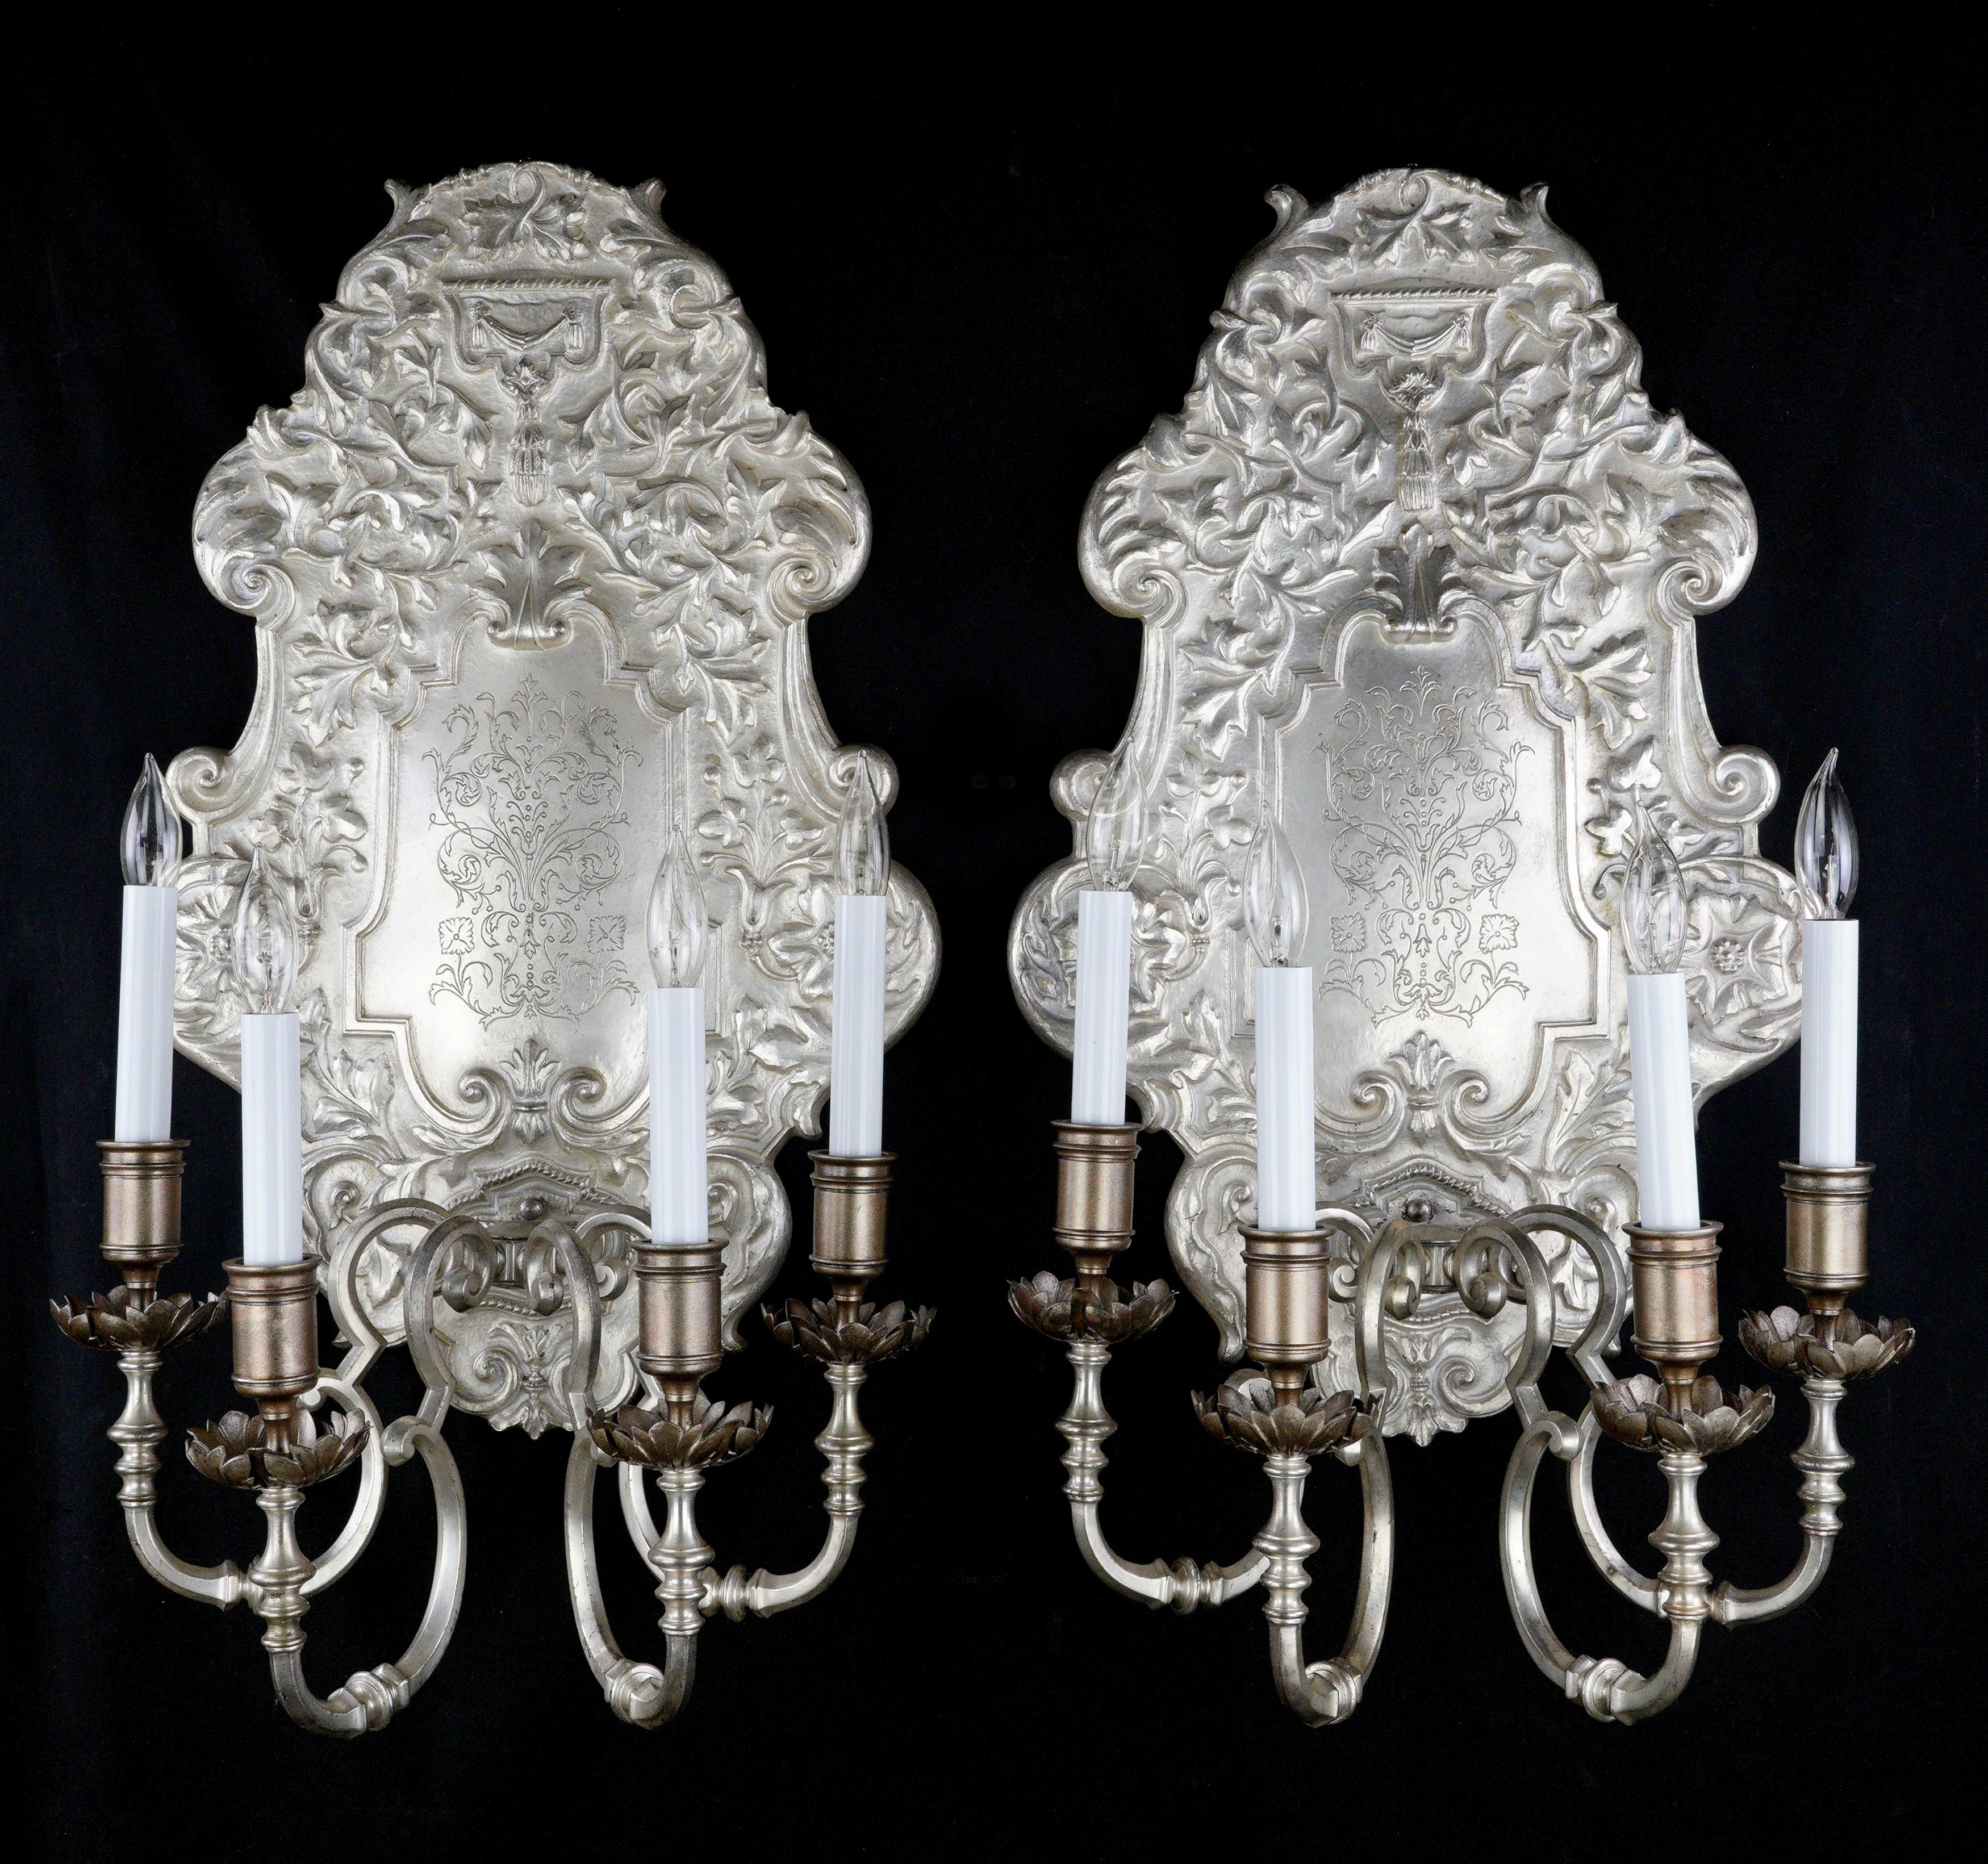 This pair of oversized silvered bronze sconces by EF Caldwell is a testament to the craftsmanship and design sensibilities of the late 19th century. Made in America during the late 1890s, these sconces showcase the artistry of the era.
The sconces